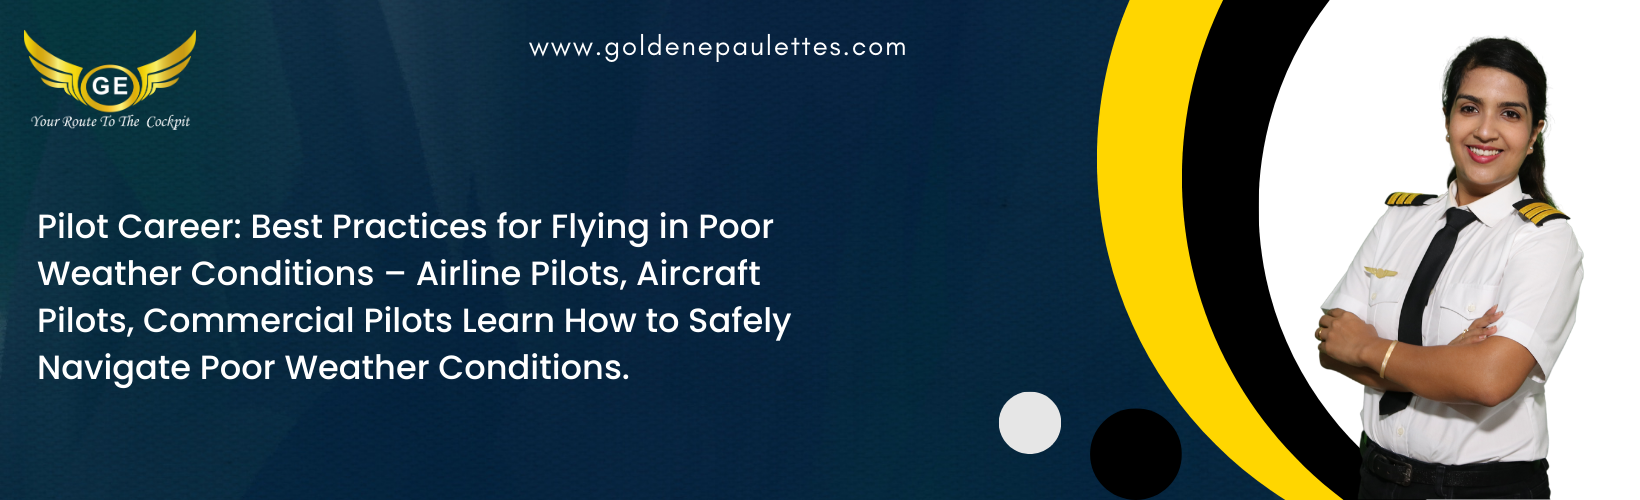 Best Practices for Flying in Poor Weather Conditions